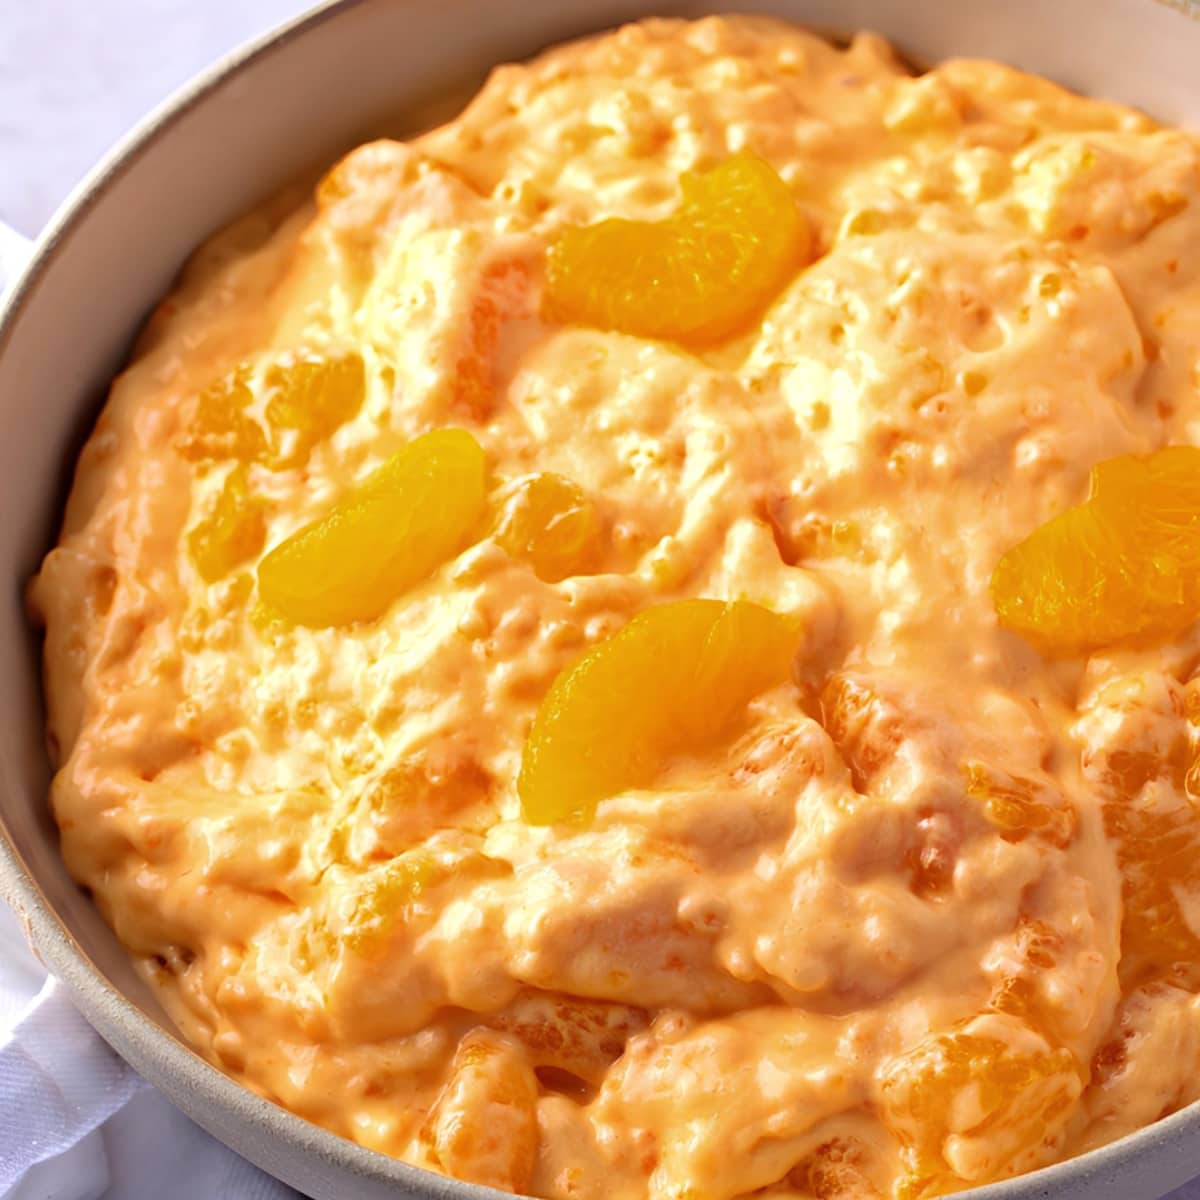 Close up of a Bowl of Orange Creamsicle Salad Fluff with Mandarin Oranges